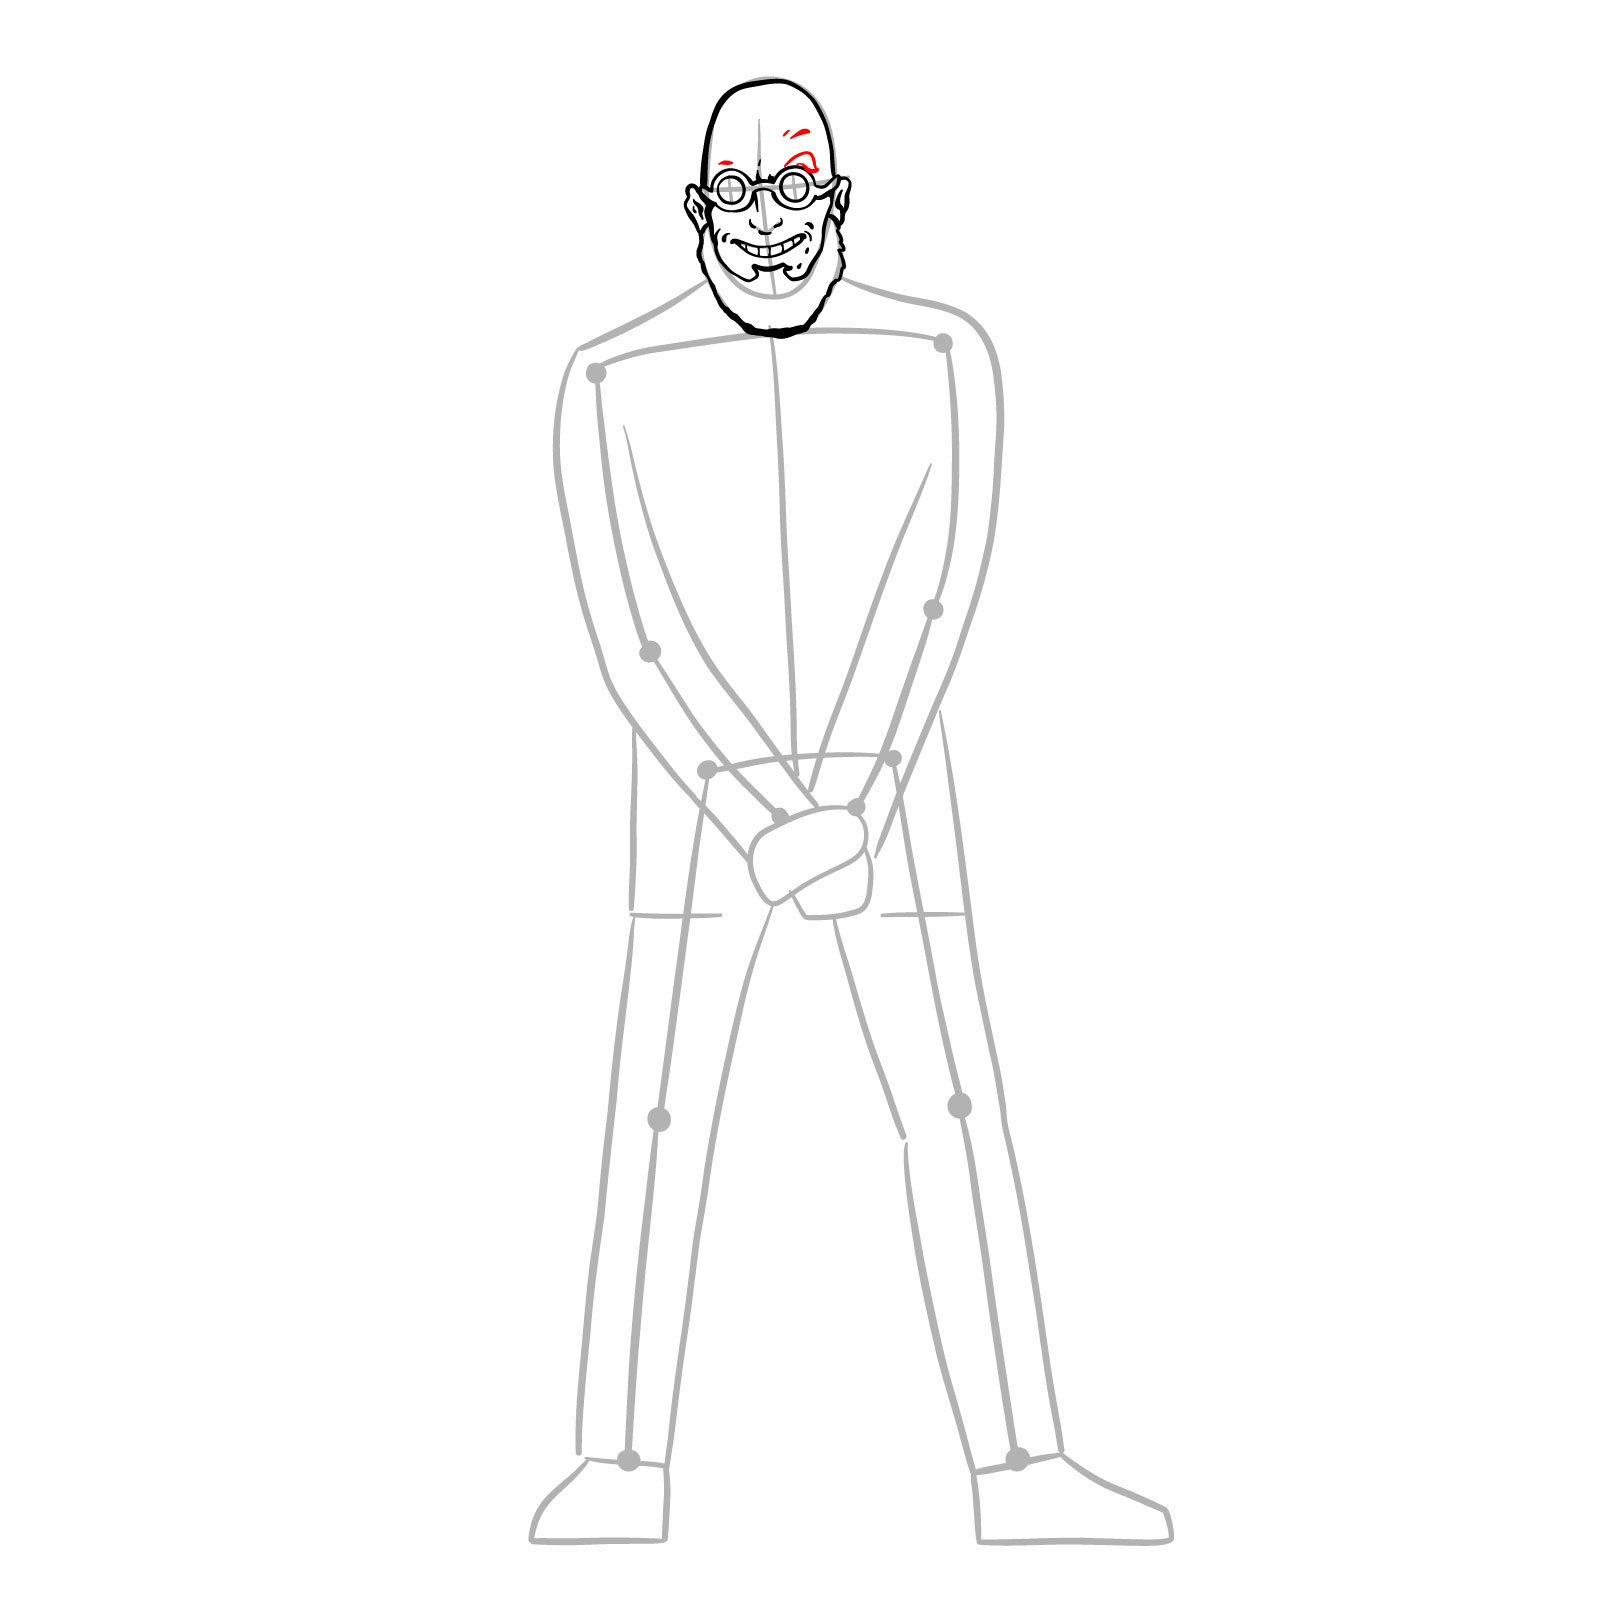 How to draw Dr. Hugo Strange from DC Comics - step 14